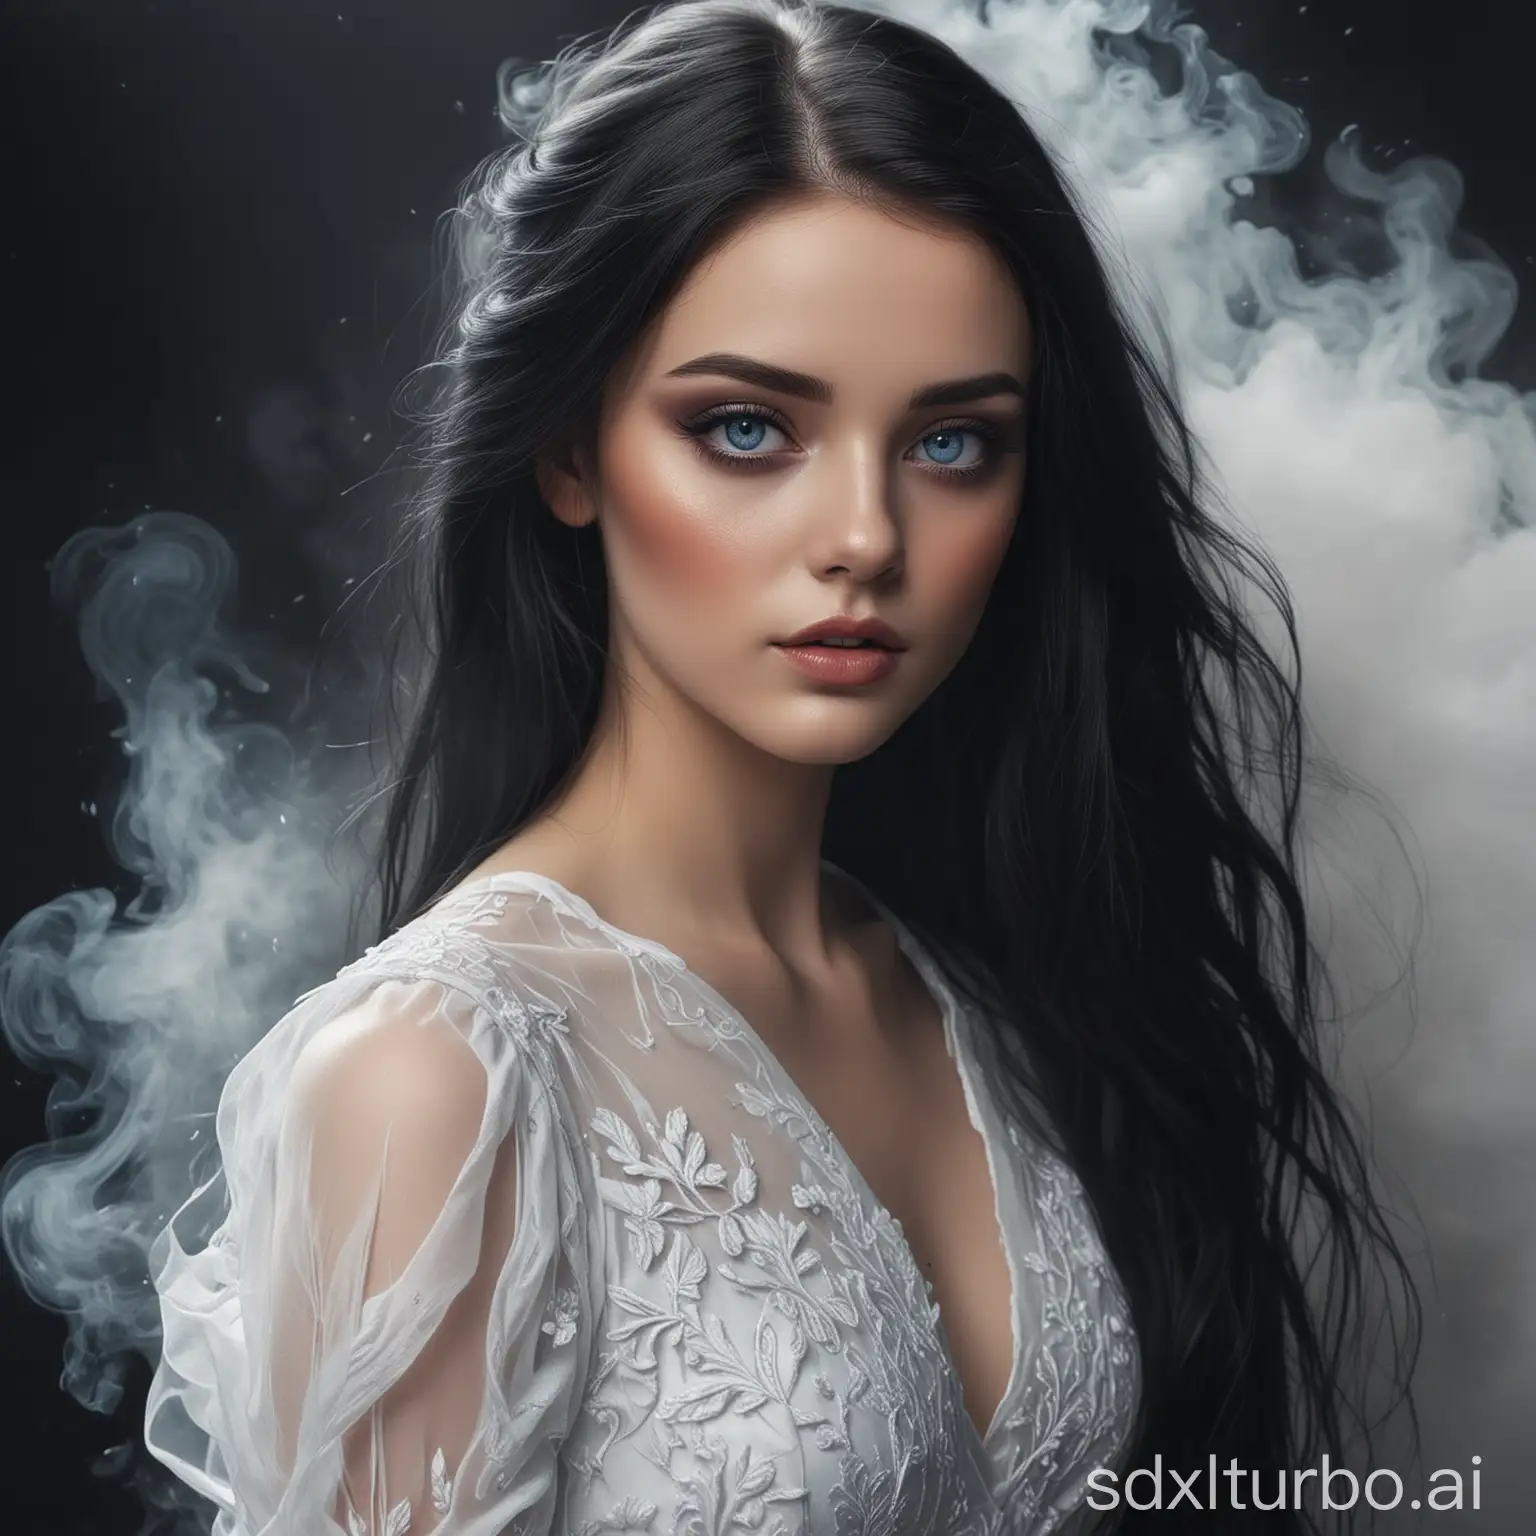 girl with black long hair, blue eyes, in a white dress, with makeup, in smoke, in realistic style